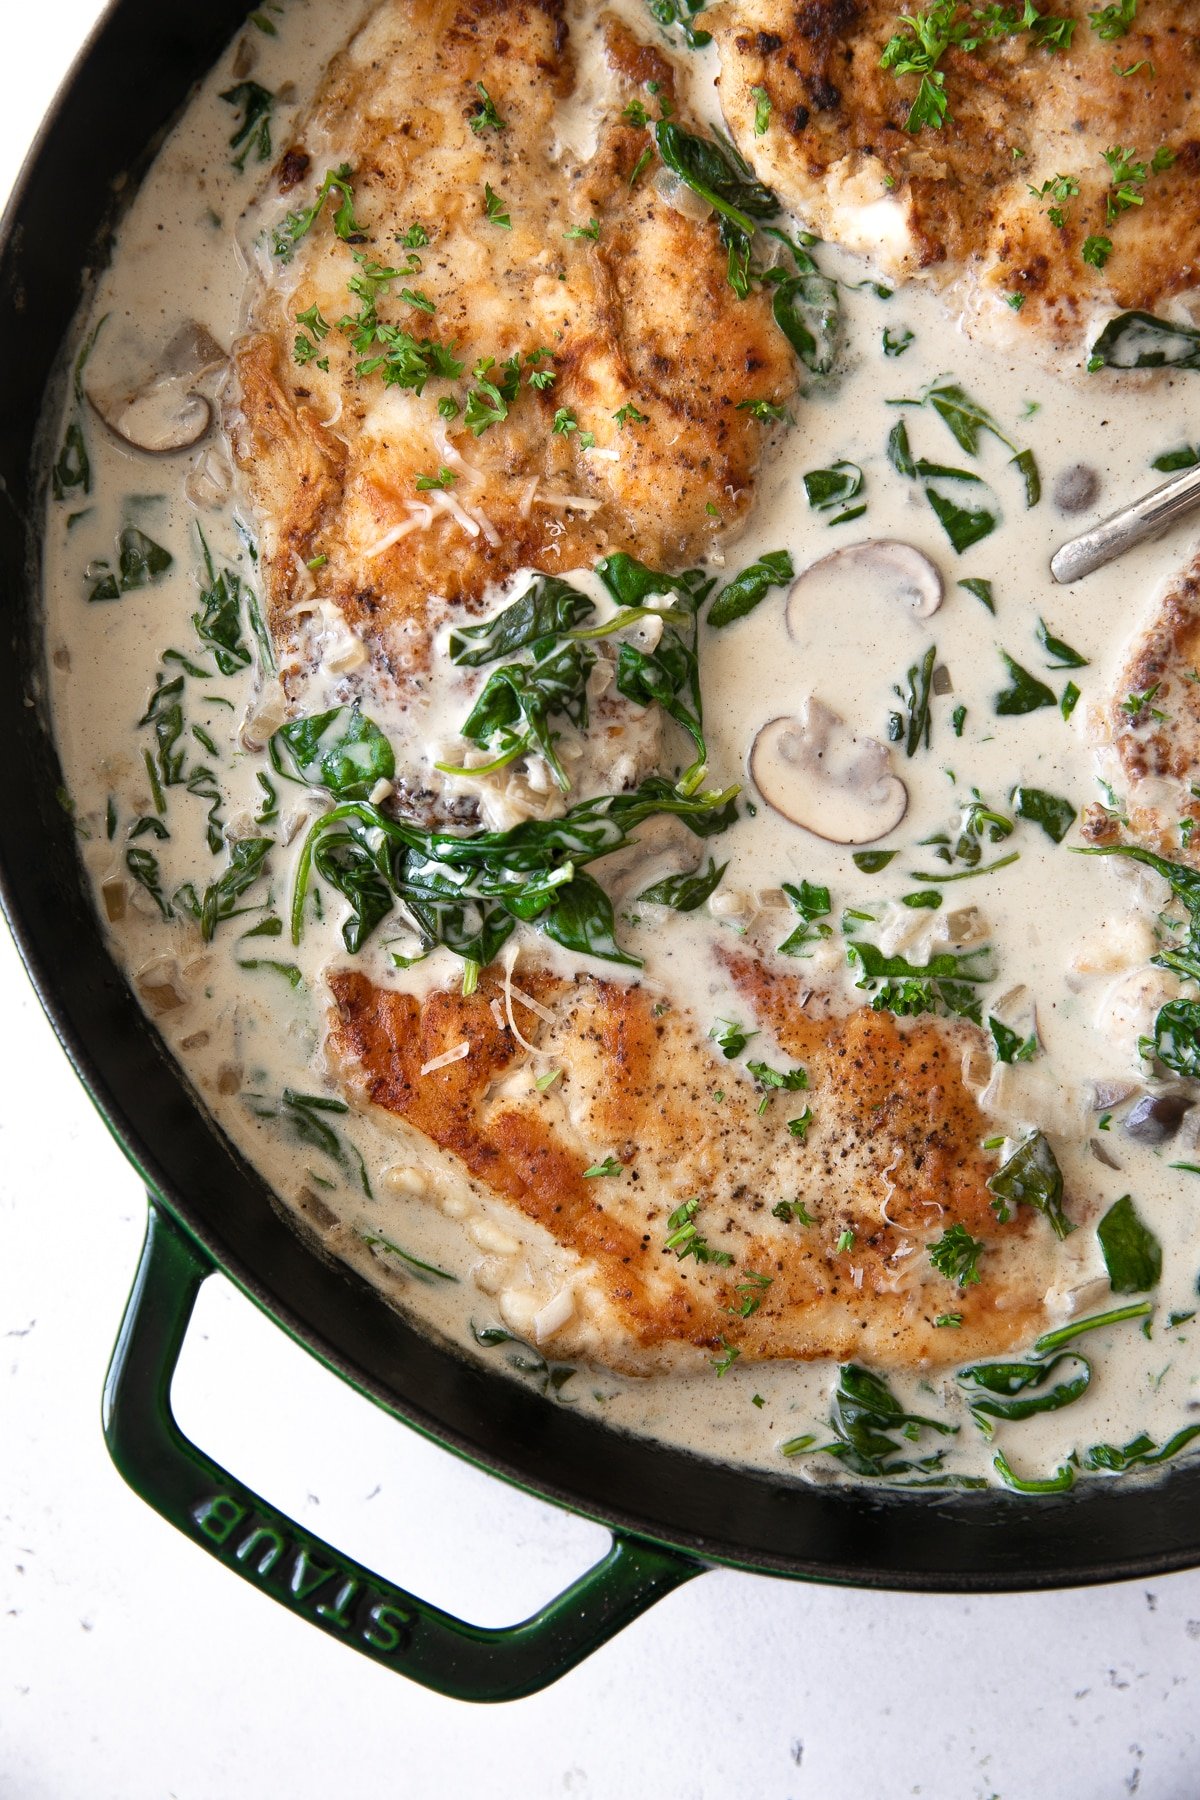 Skillet filled with a homemade cream sauce with mushrooms and spinach.